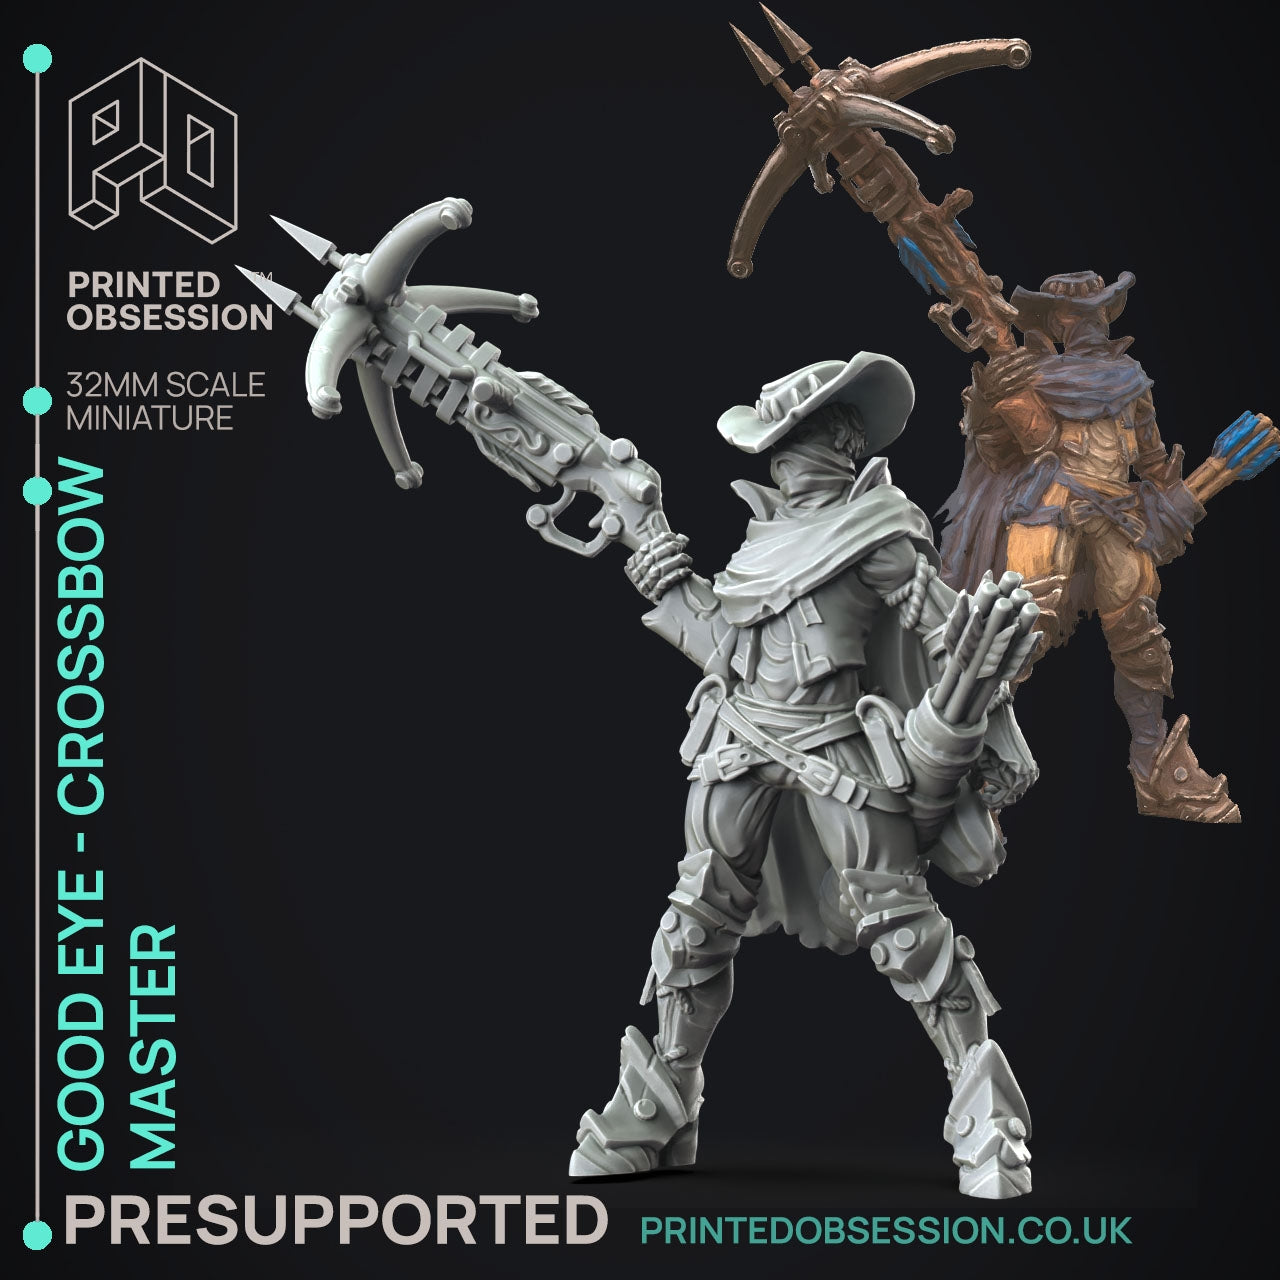 Crossbow Master - The Printed Obsession - Table-top mini, 3D Printed Collectable for painting and playing!